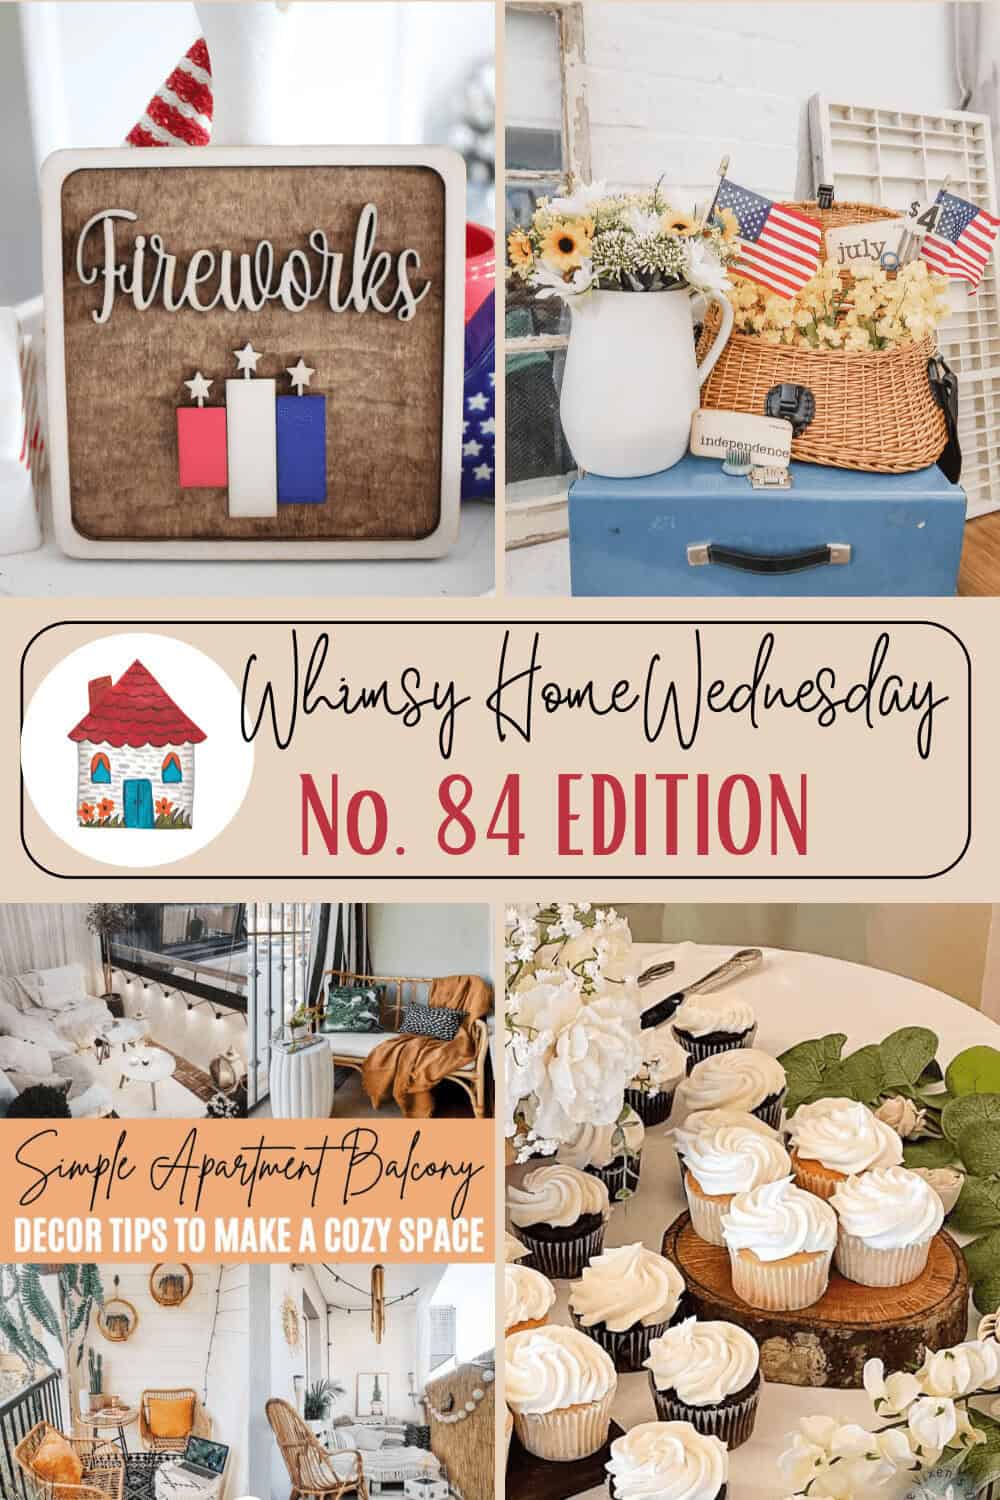 A collage featuring a '#84 Whimsy Home Wednesday' banner, patriotic decorations with American flags, simple balcony decor ideas, a cozy living room, and a display of cupcakes and white flowers.